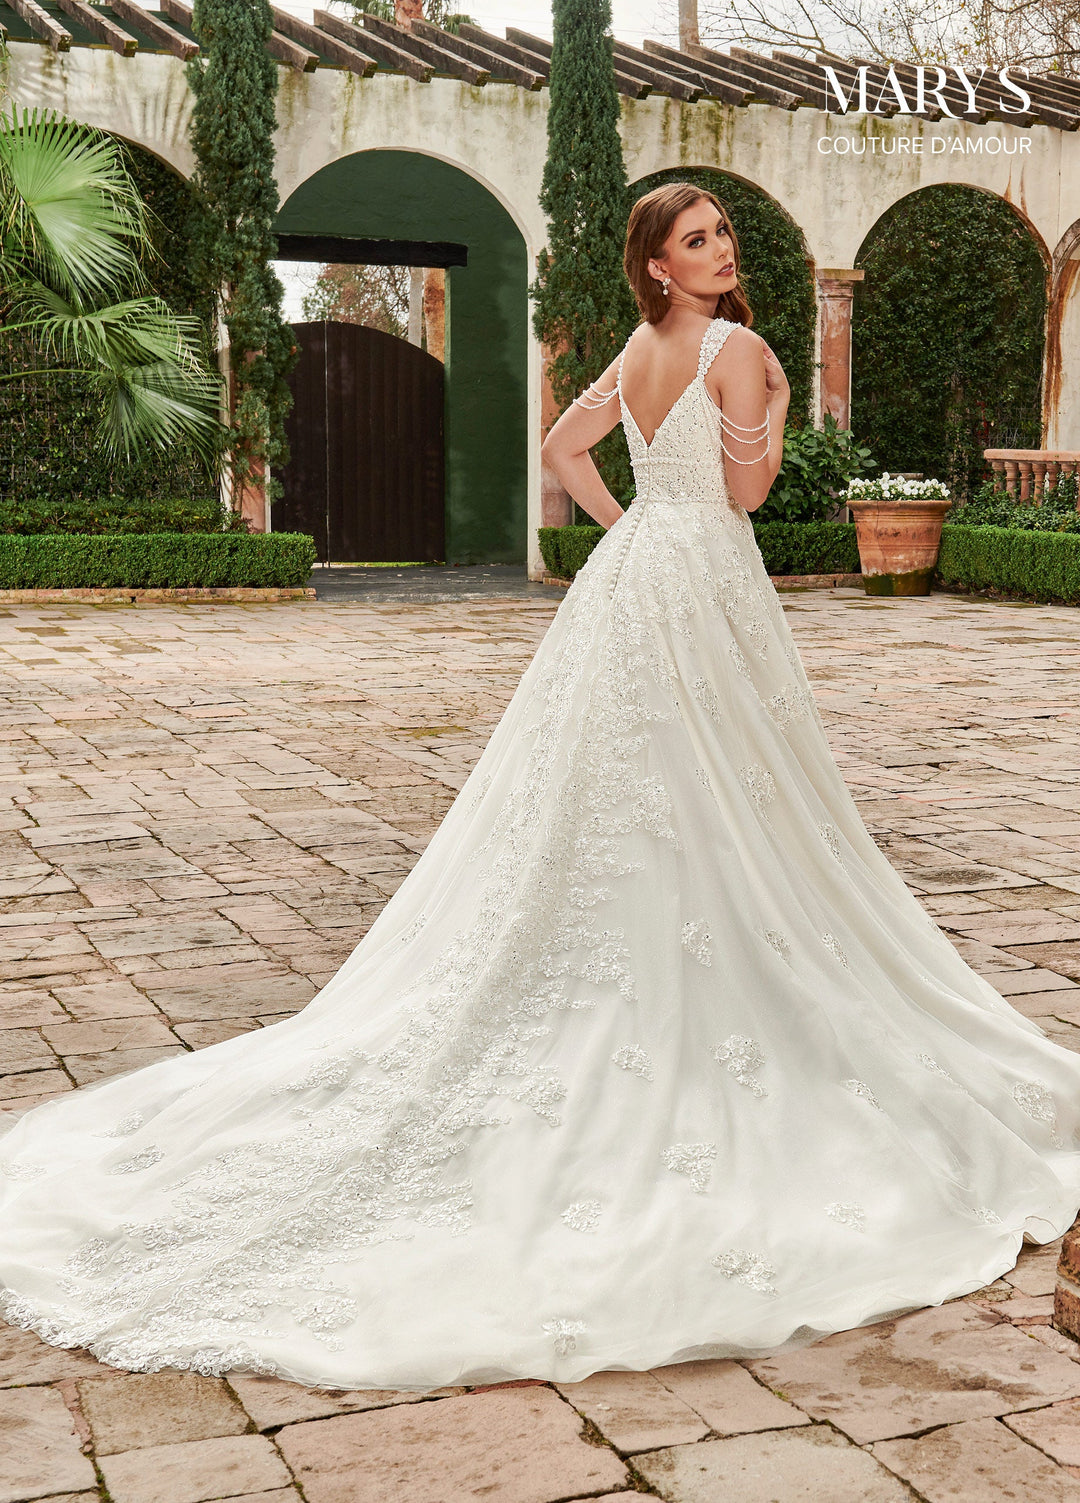 Cold Shoulder Wedding Dress by Mary's Bridal MB4115